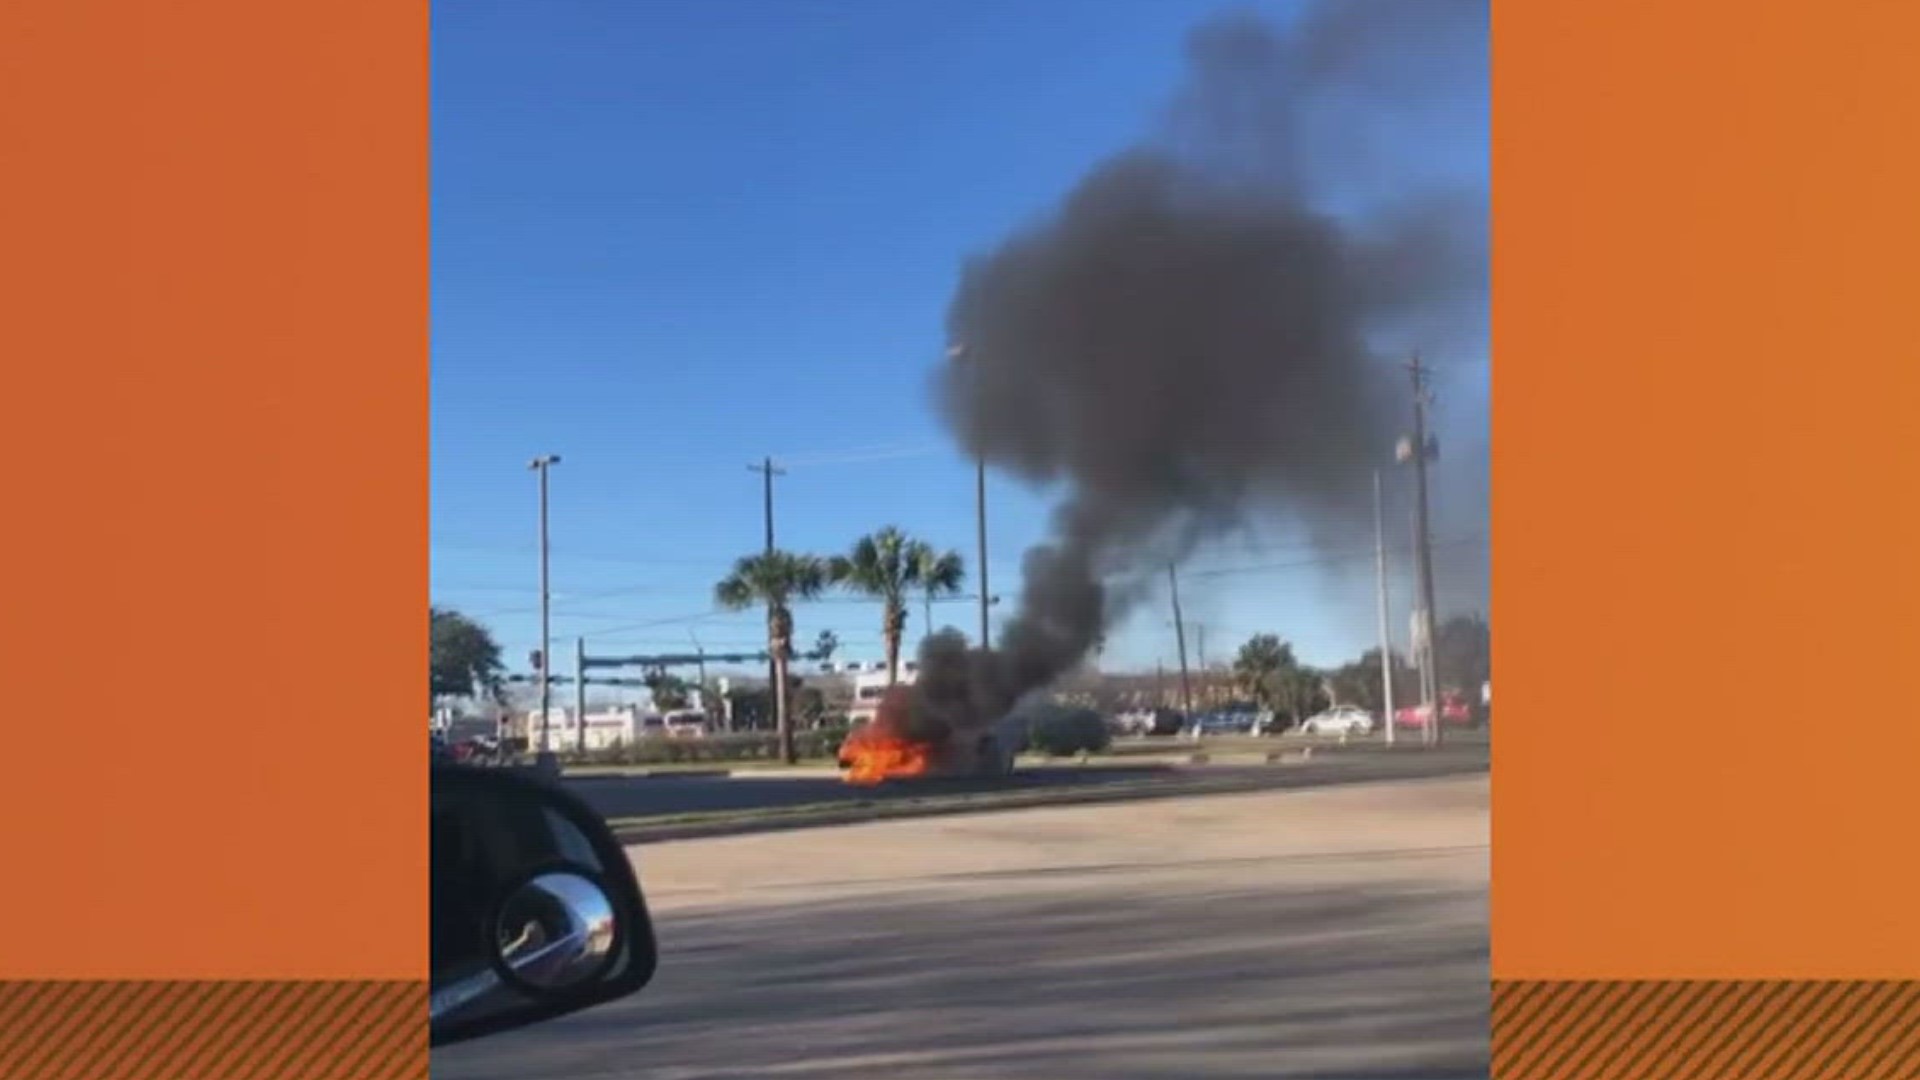 A 3NEWS viewer sent us a video that shows a Dodge Ram pickup truck fully engulfed in flames at the Walgreens on Staples and Saratoga.